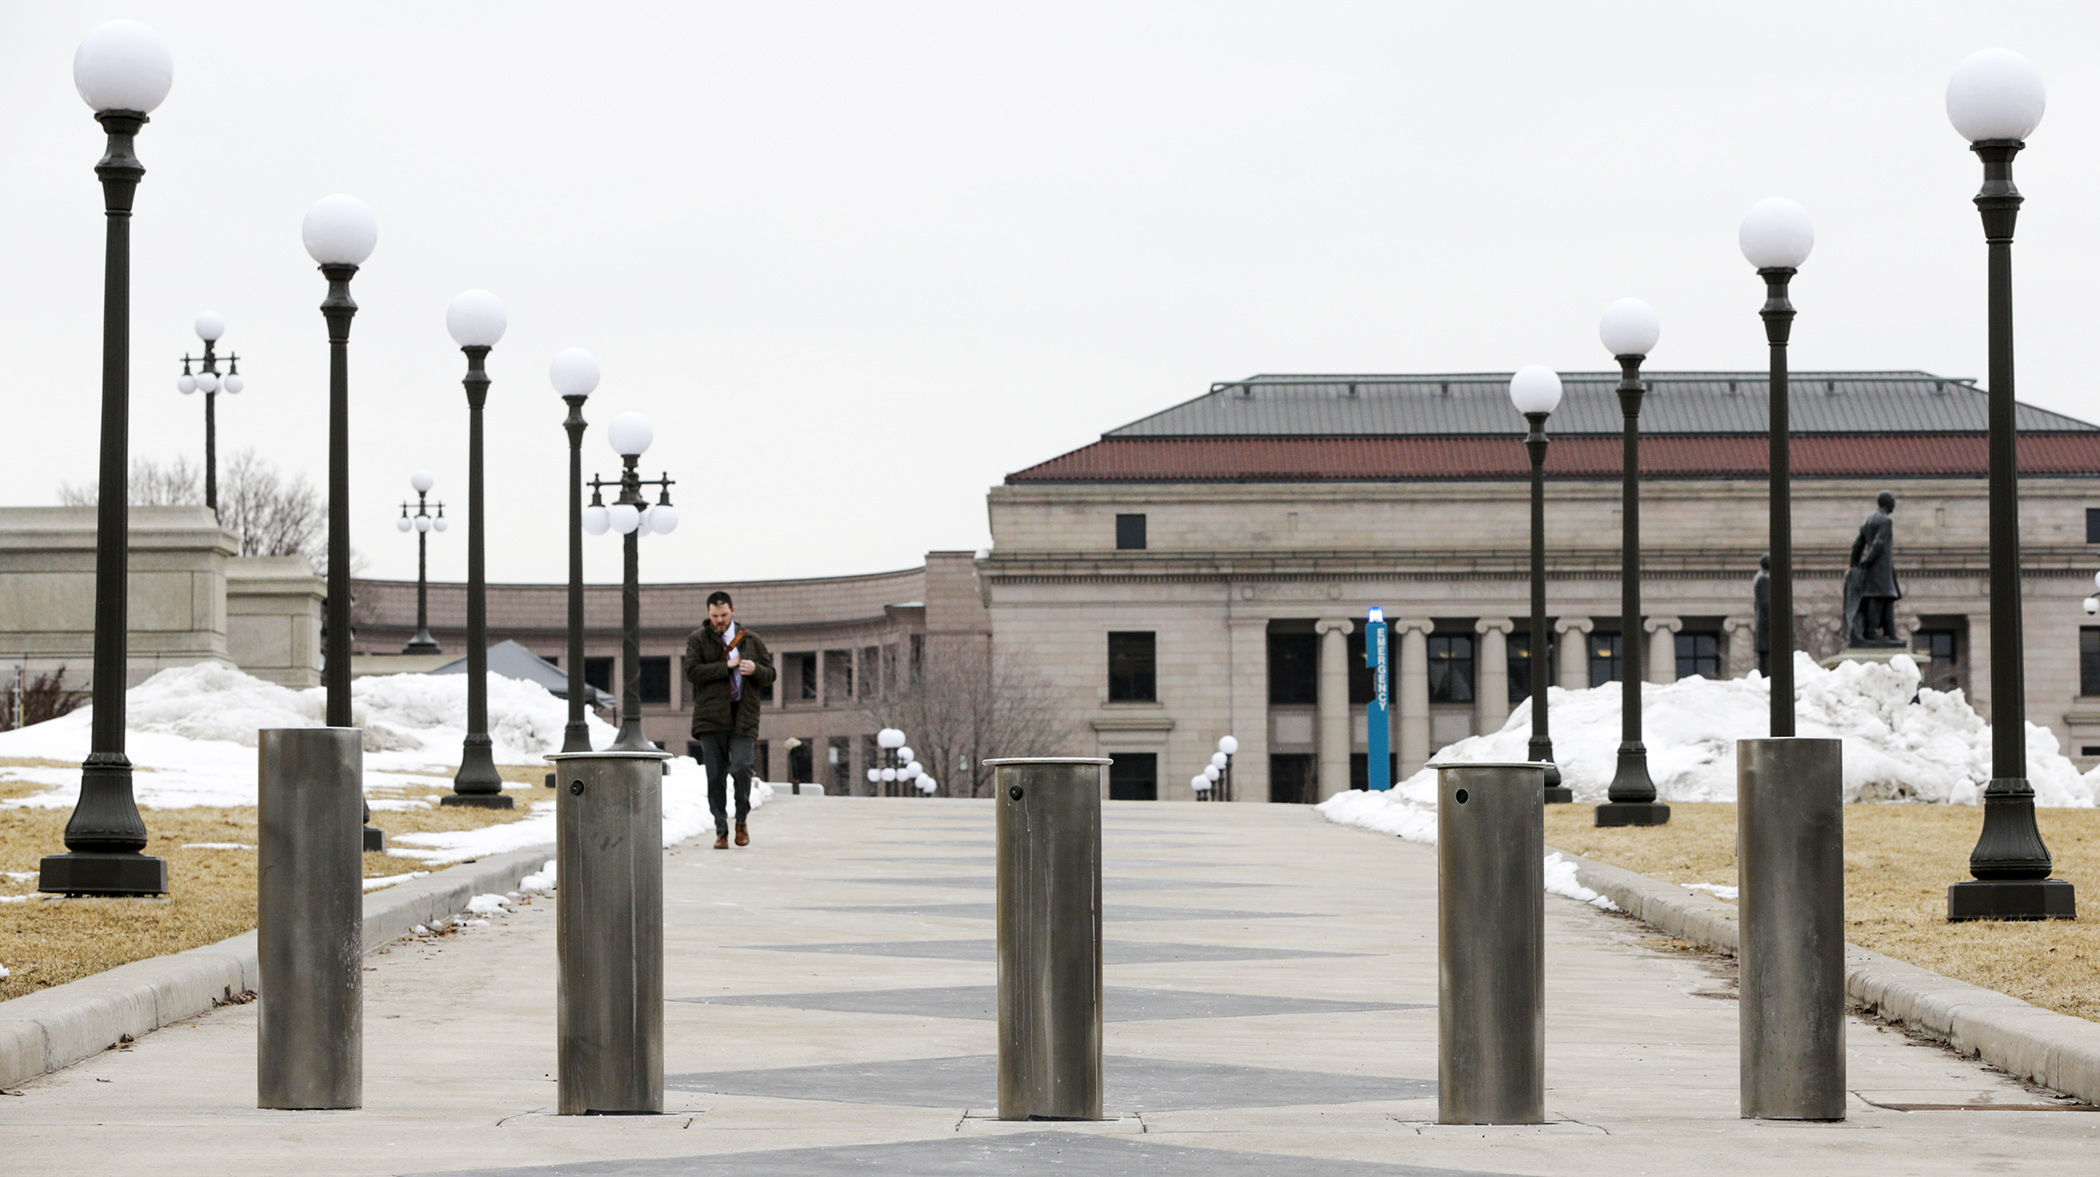 One of the most visible security upgrades made to the Capitol Mall is the vehicle barrier at either end of the Aurora Promenade. Photo by Paul Battaglia